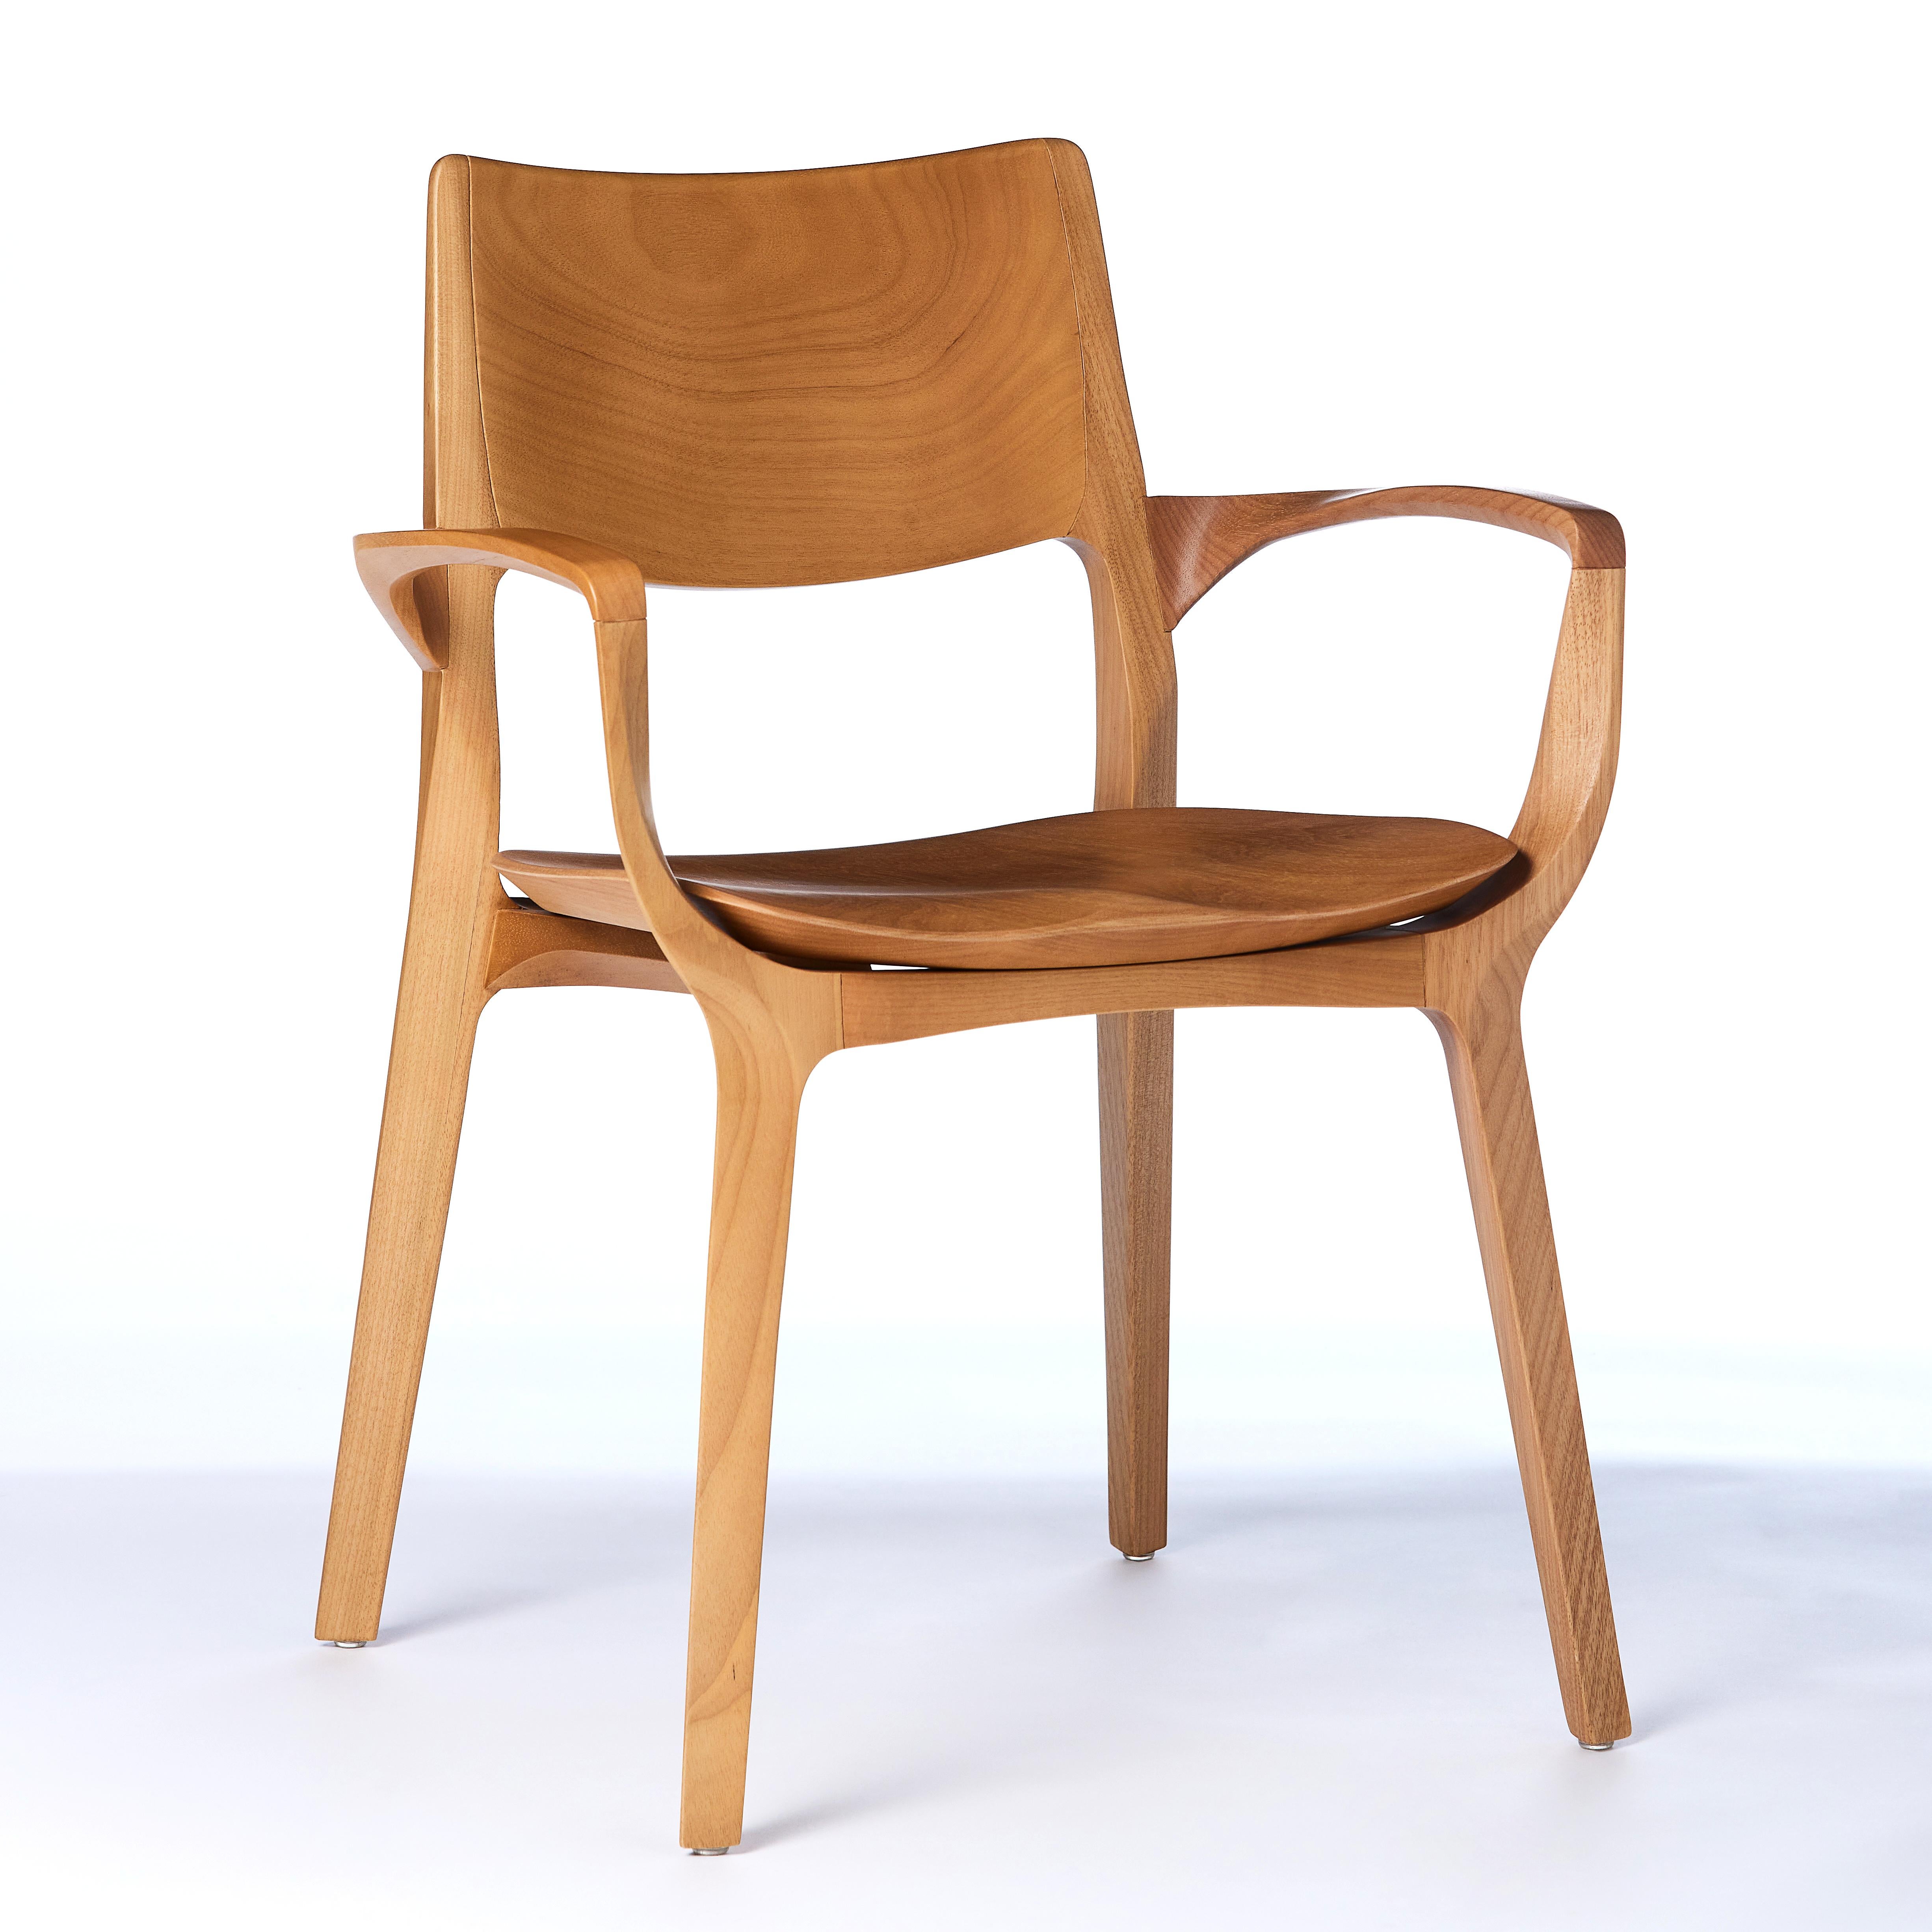 Modern Style Aurora Chair Sculpted in Walnut Finish No Arms, leather seating For Sale 6